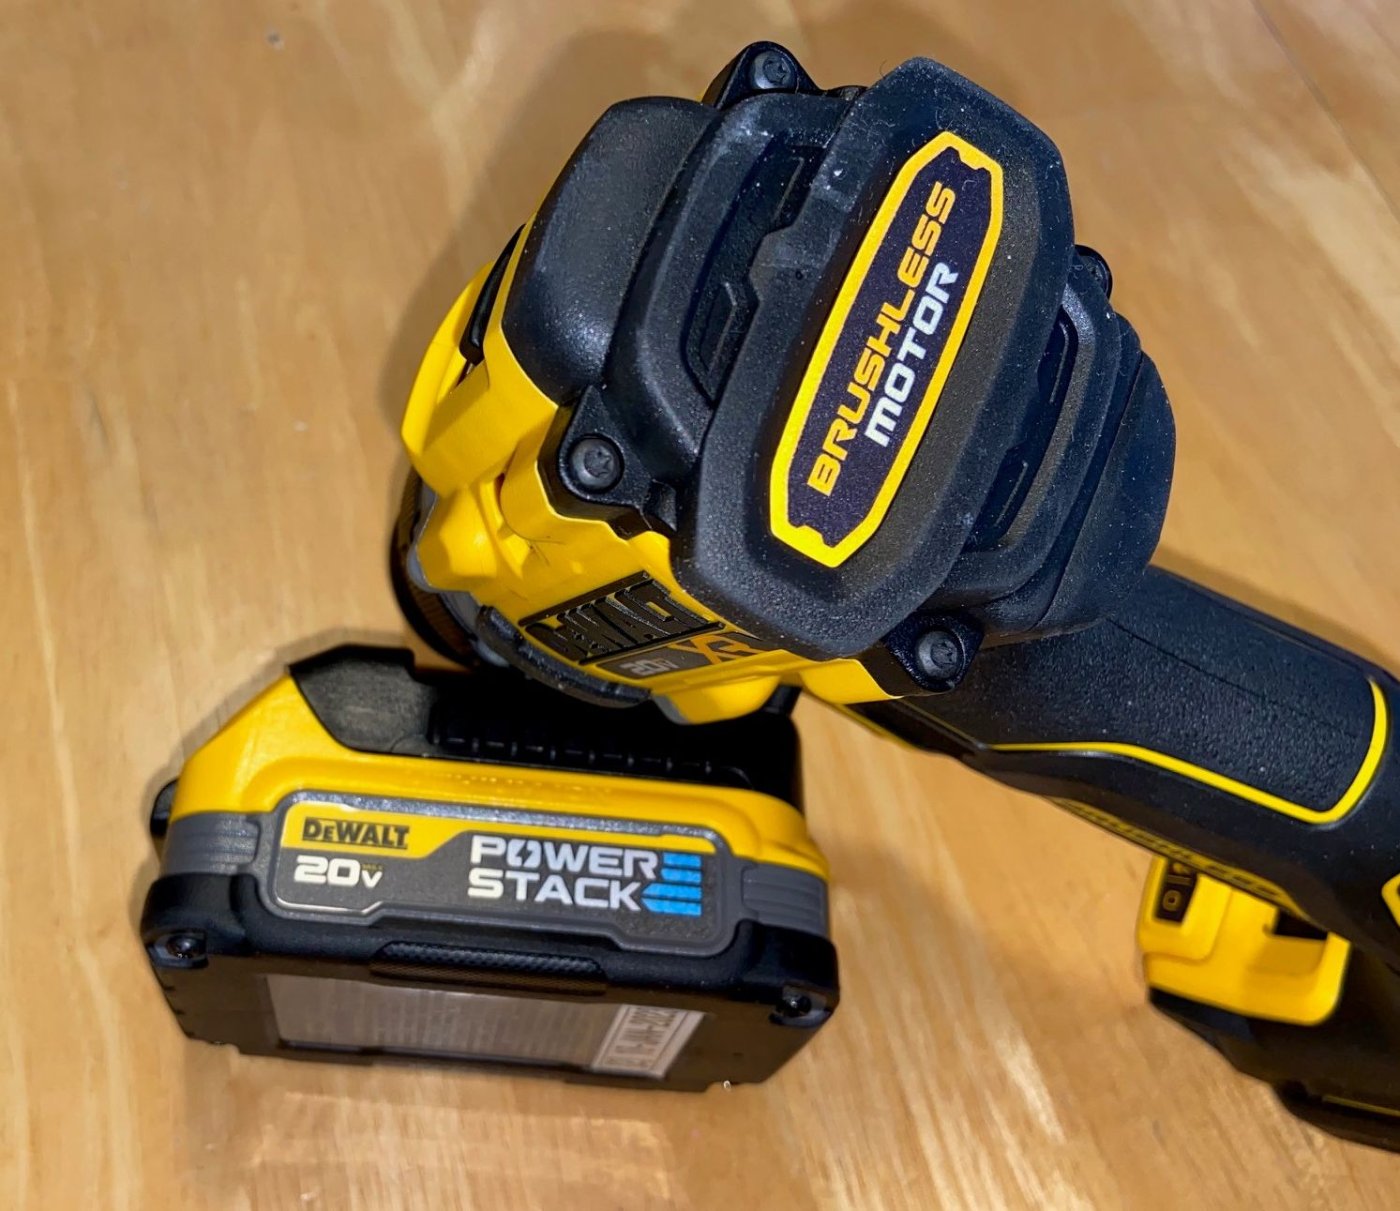 DeWalt PowerStack Battery and Technology Review - Pro Tool Reviews